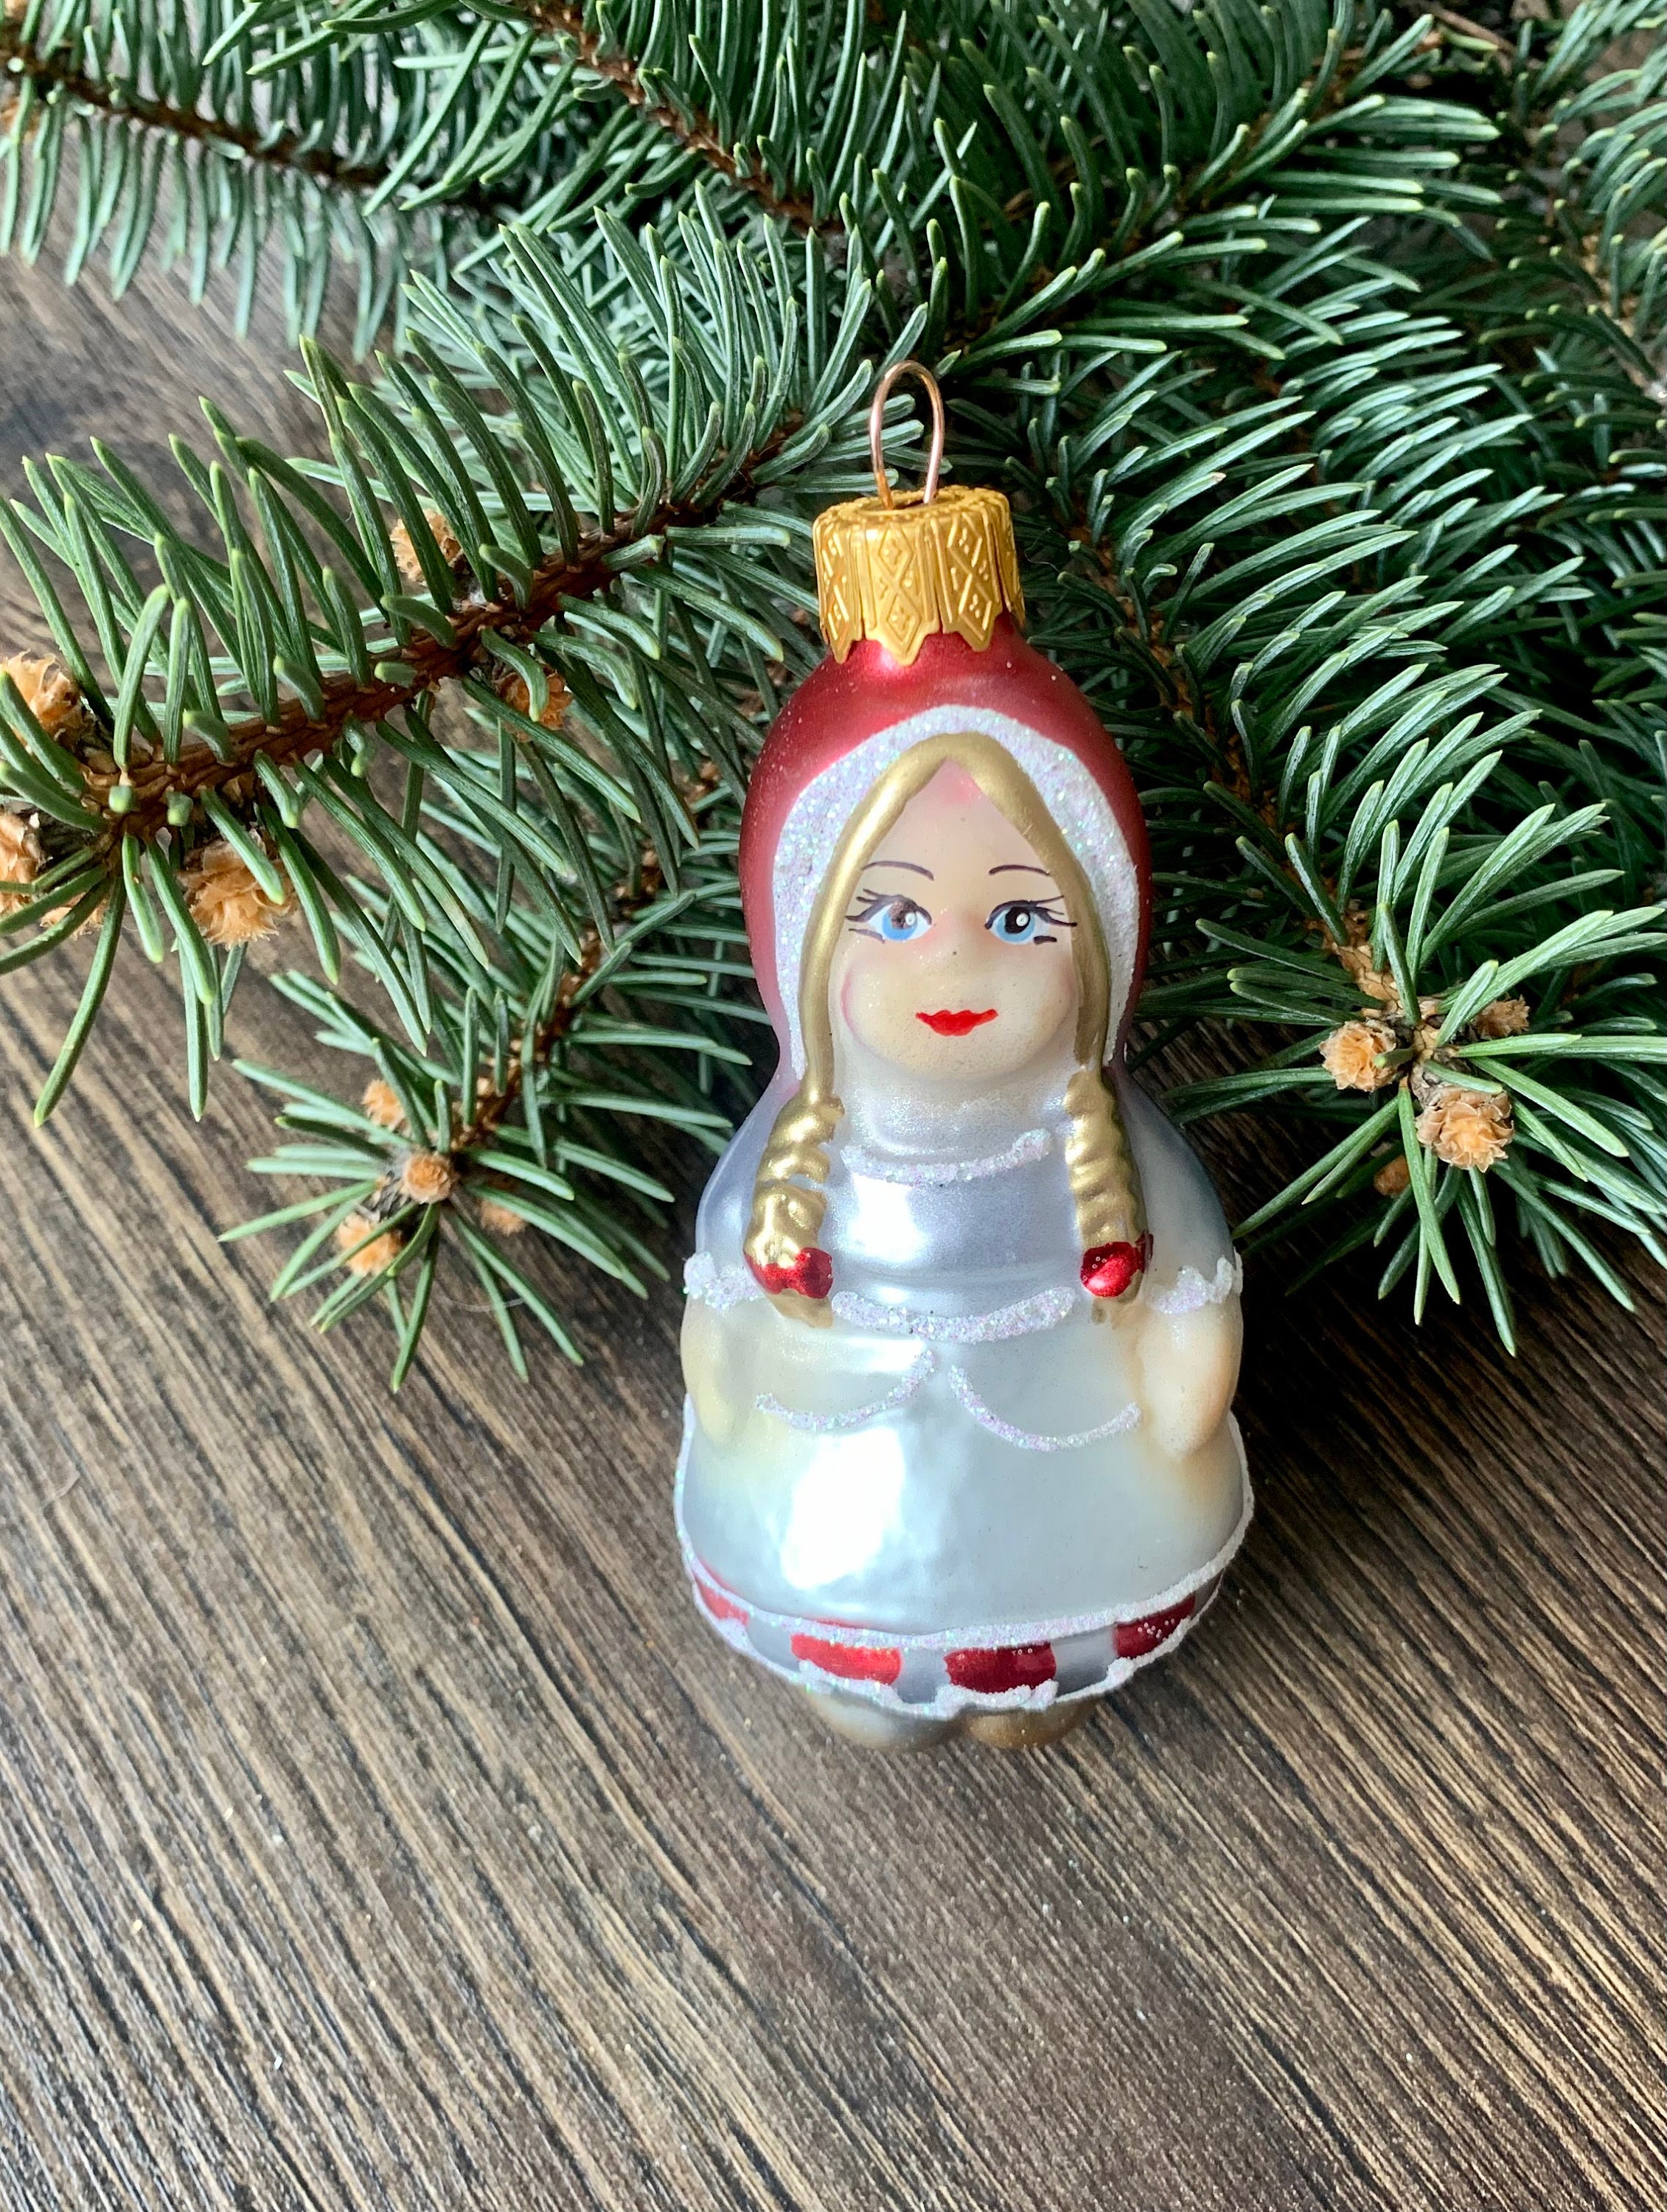 25 ideas for decorating clear glass ornaments – The Ornament Girl